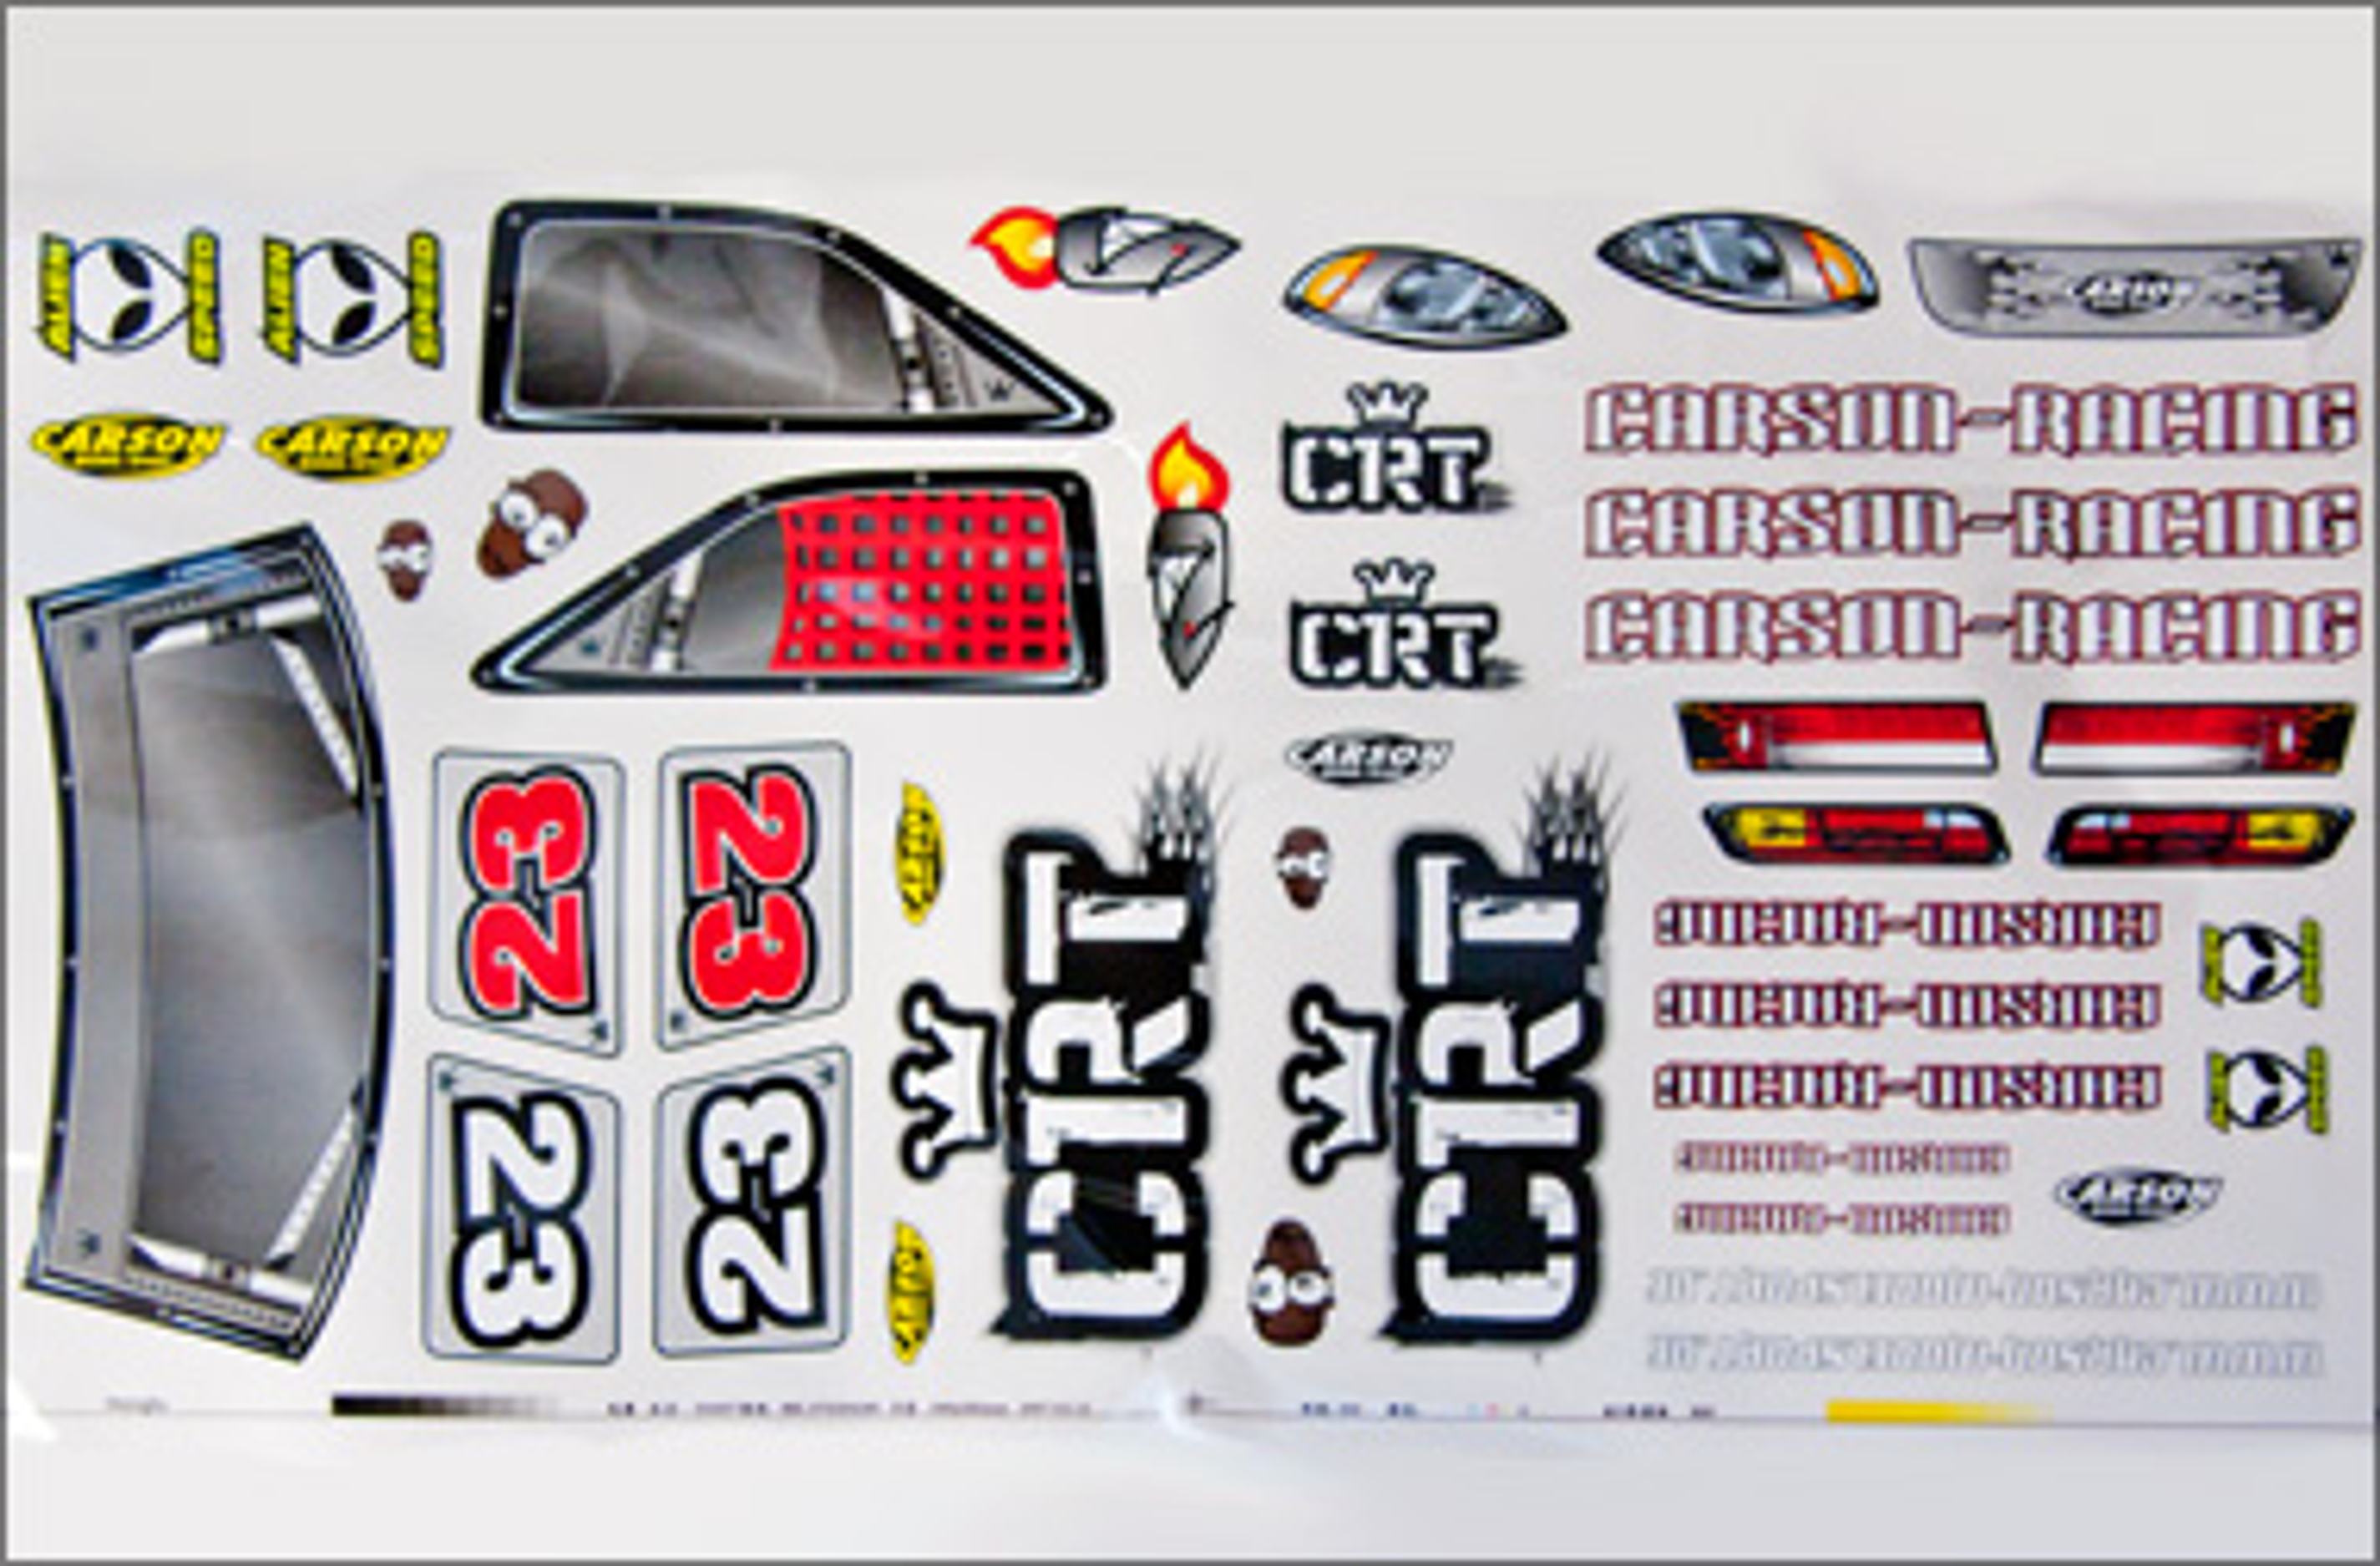 305147 Painted Smartech body shell for Monster-Truck, Comanche, CRT, CPT, 1 pce.